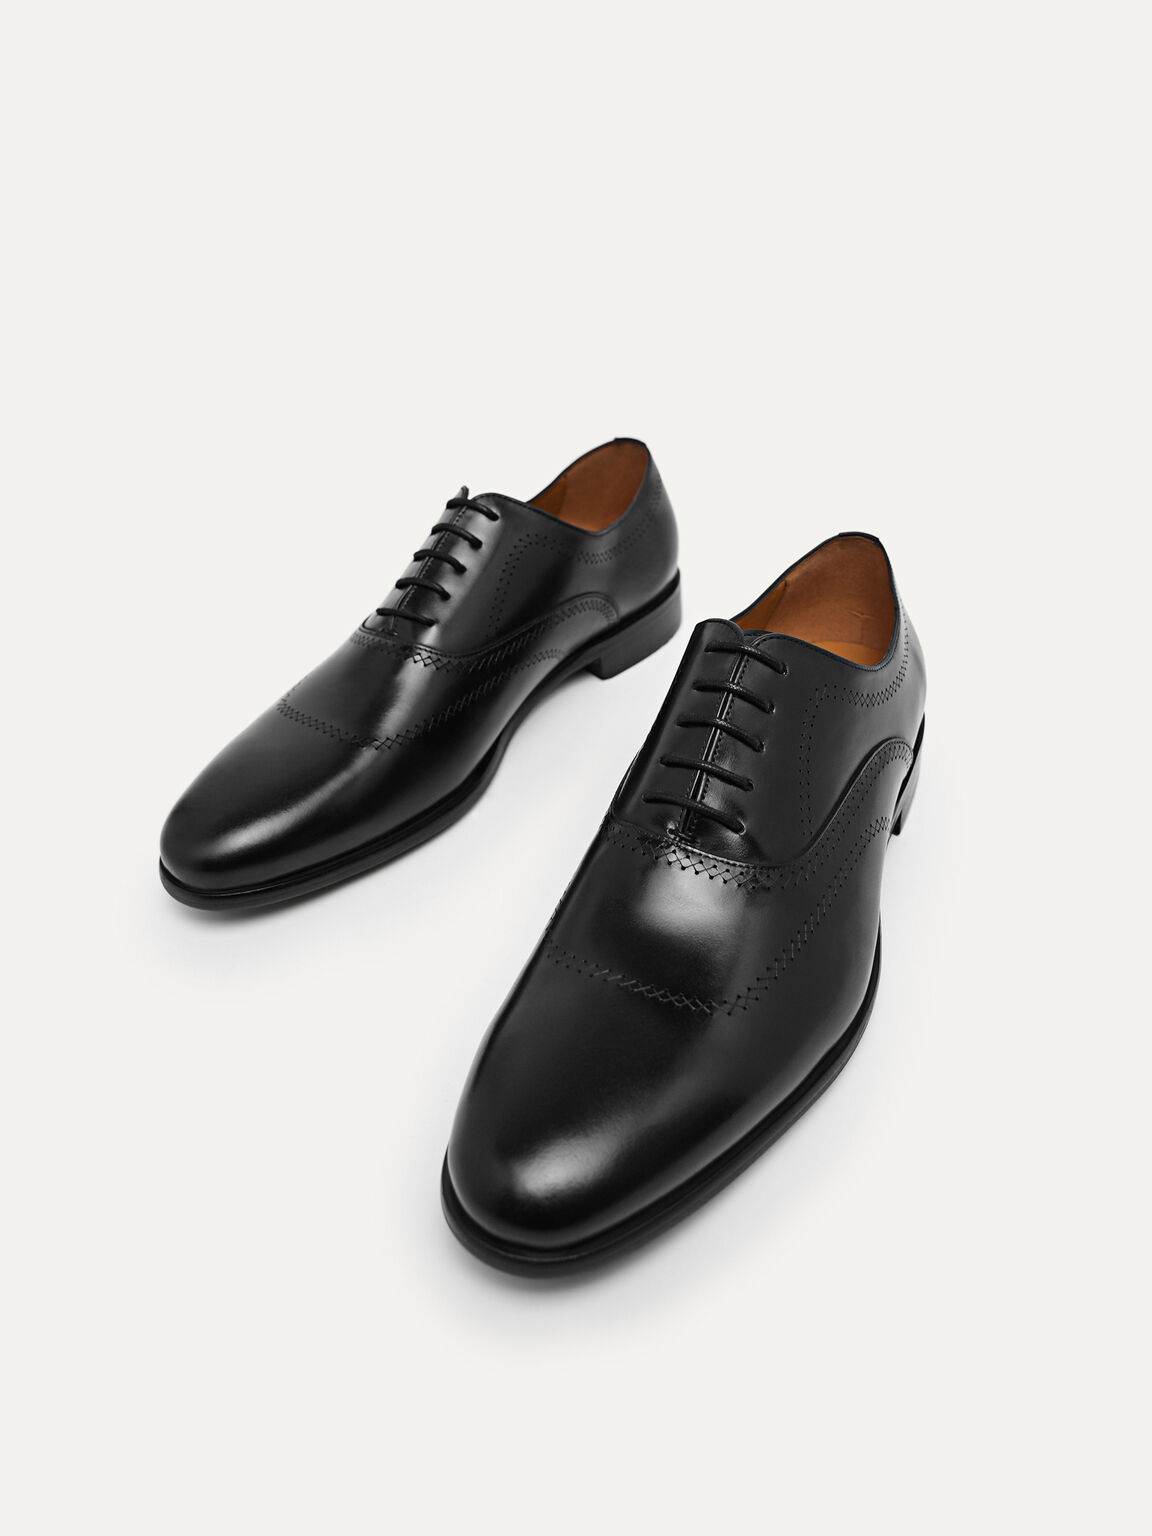 Leather Oxford Shoes, Black